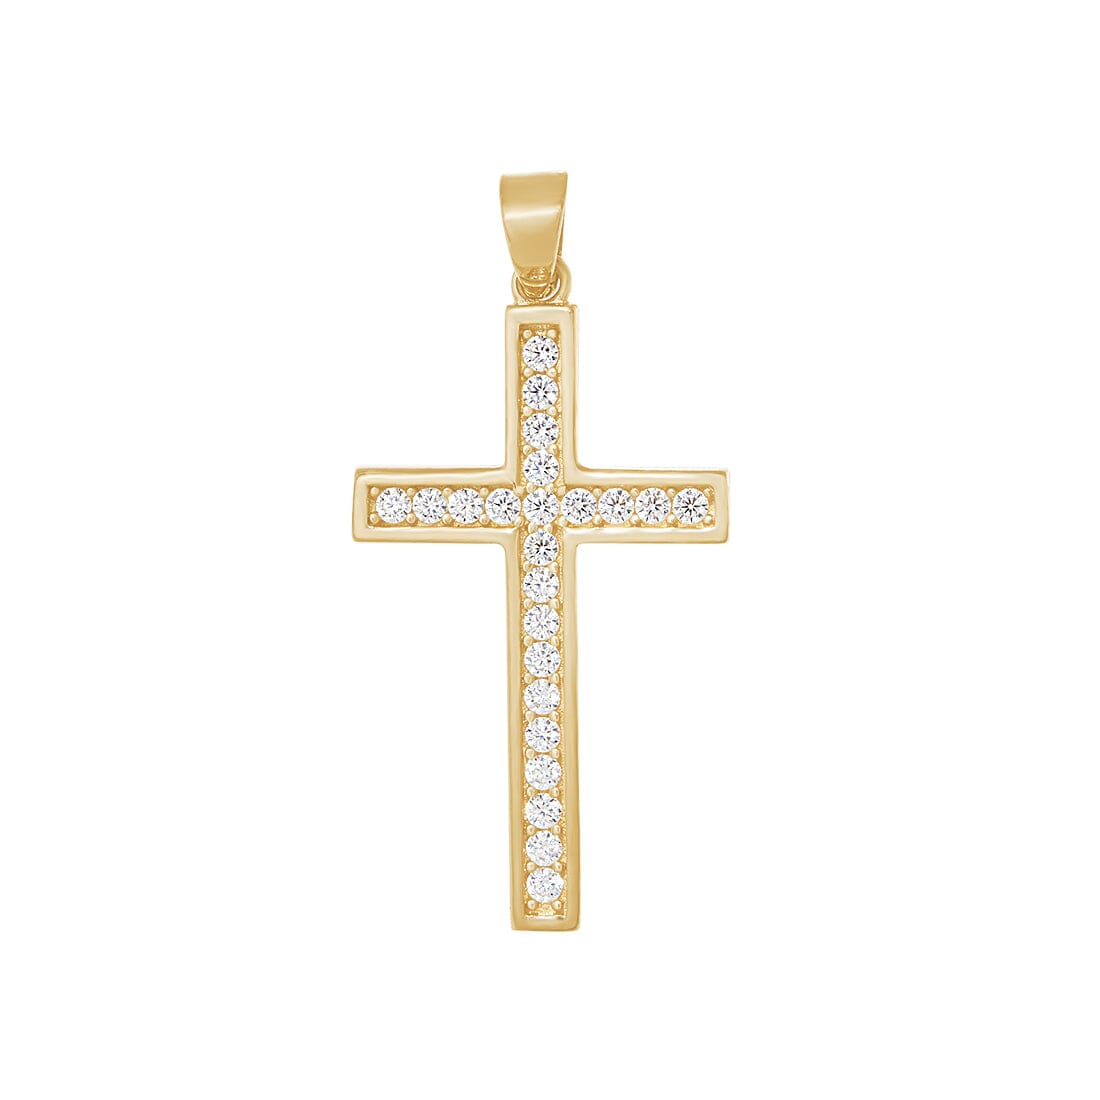 9ct Yellow Gold with Cubic Zirconia Cross Charm Necklaces Bevilles 